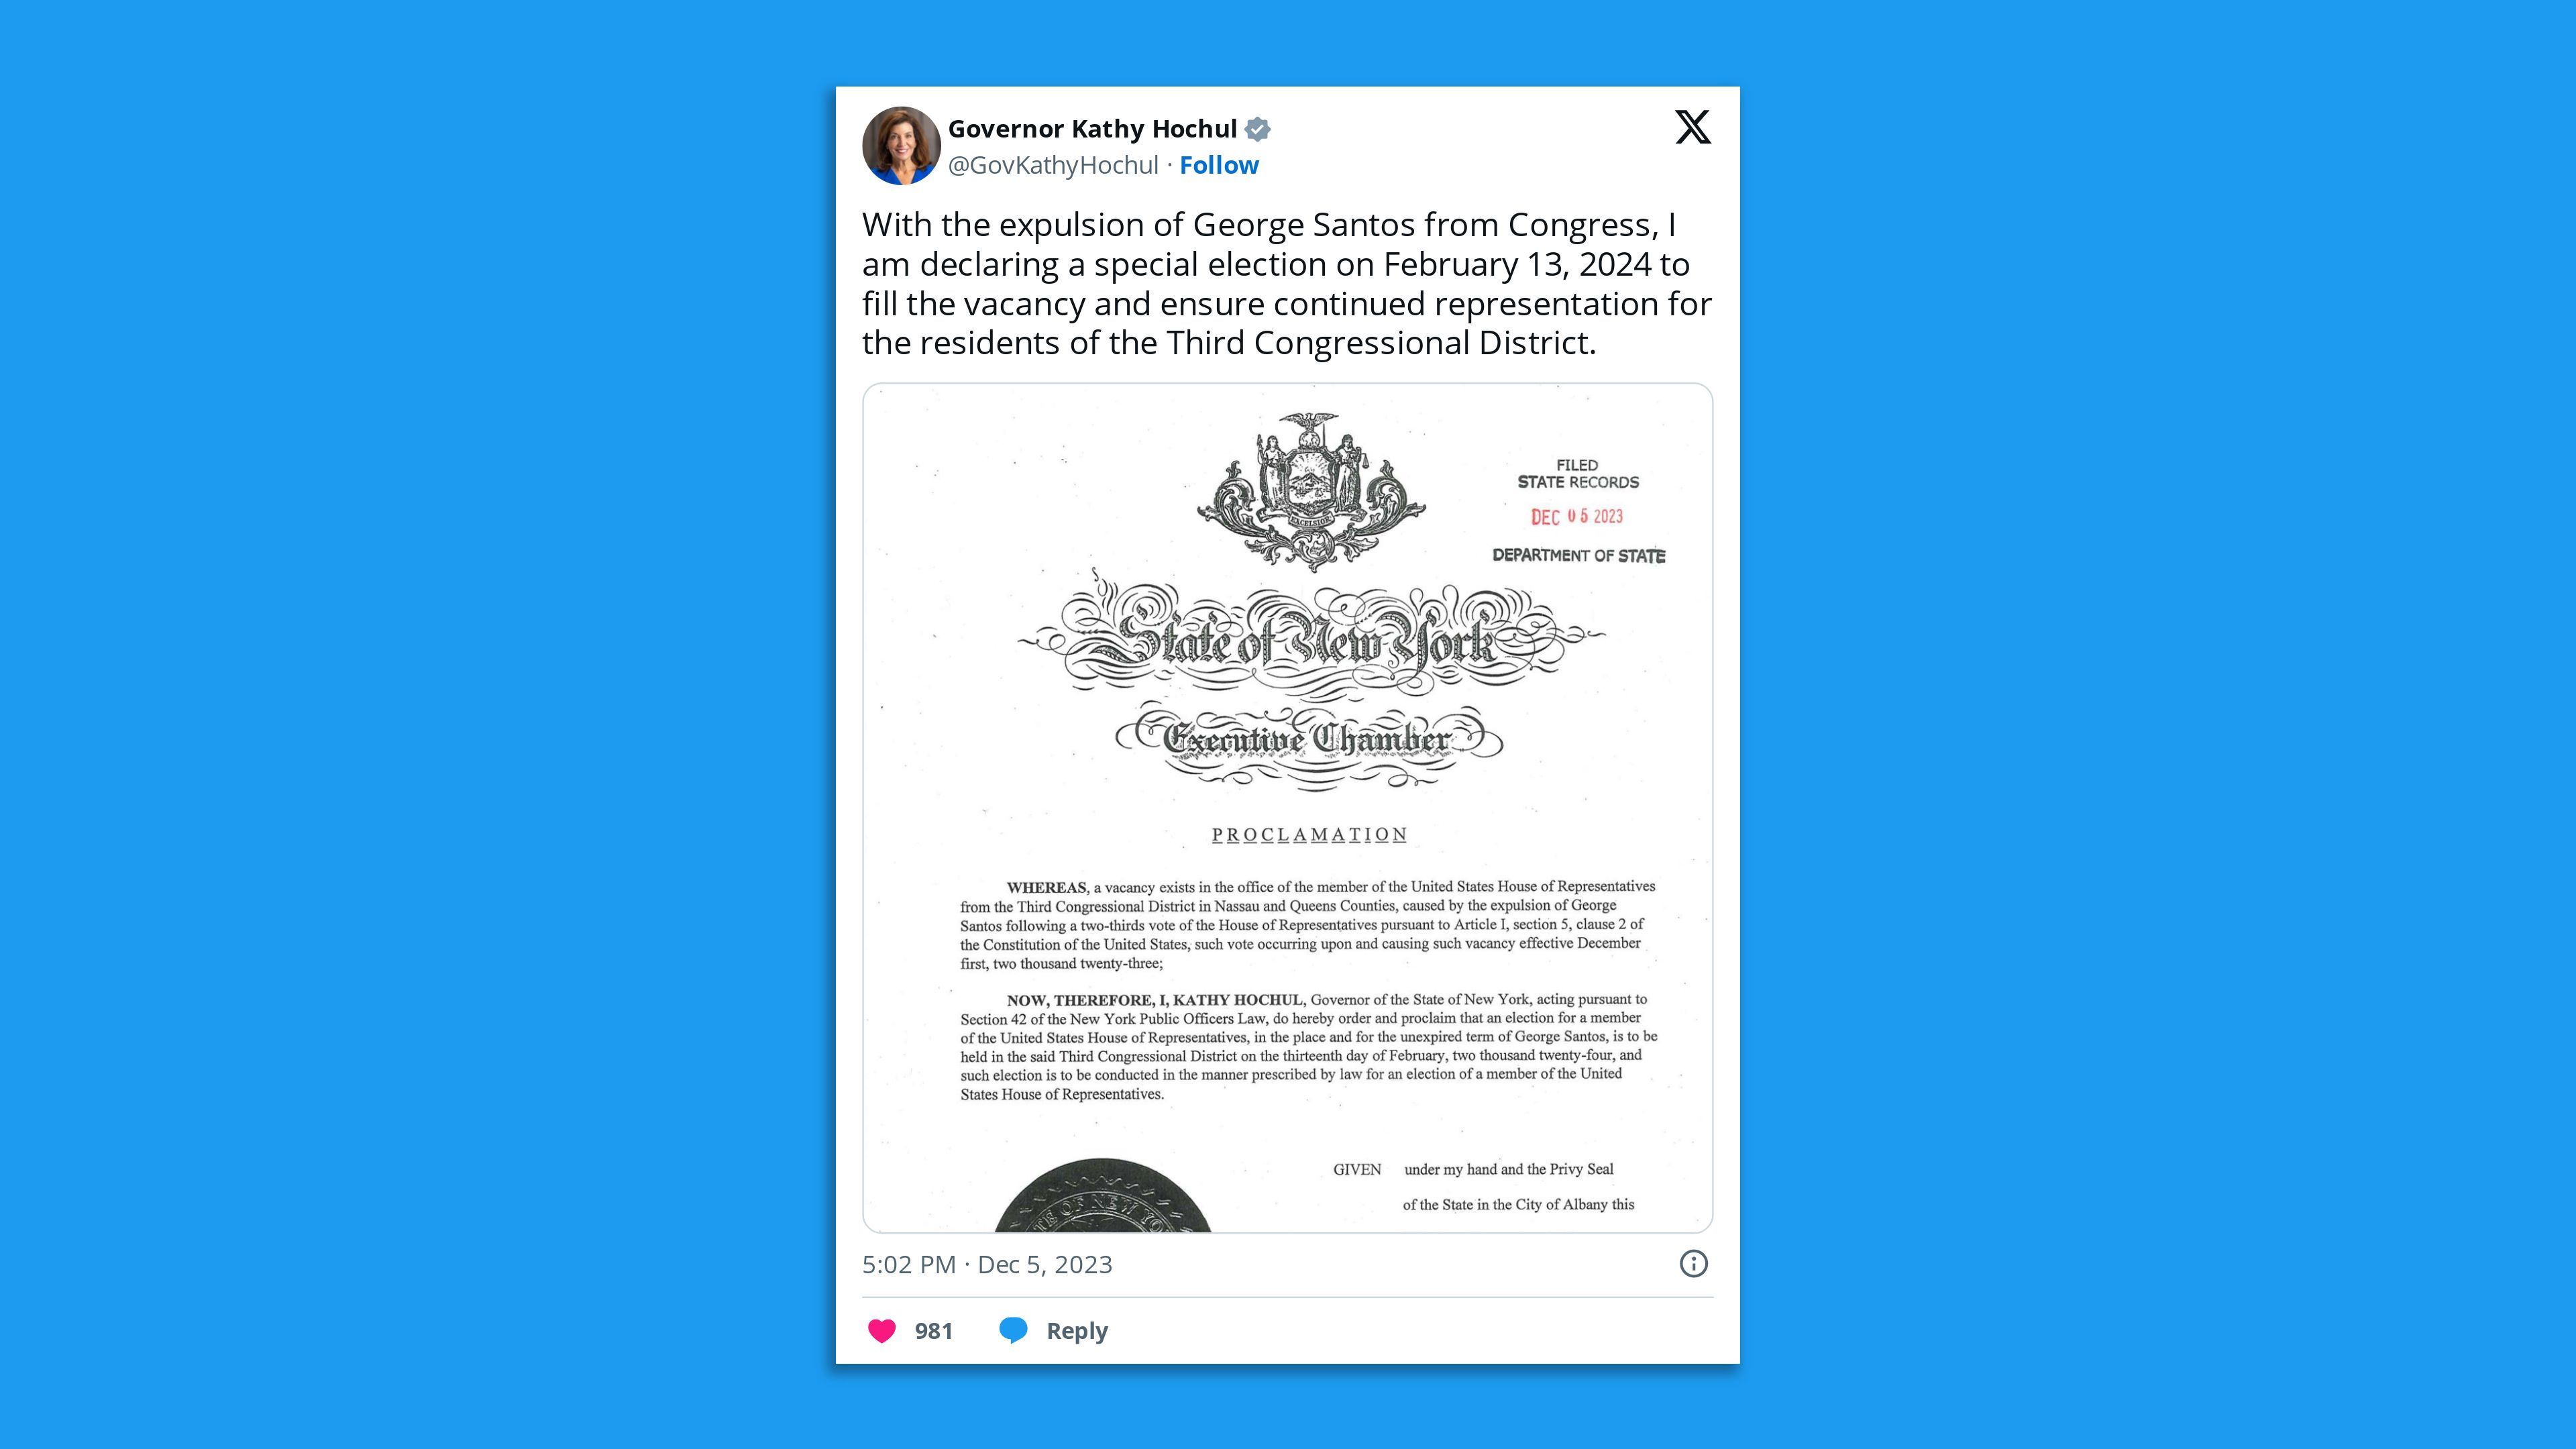 A screenshot of a tweet by New York Gov. Kathy Hochul, saying: "With the expulsion of George Santos from Congress, I am declaring a special election on February 13, 2024 to fill the vacancy and ensure continued representation for the residents of the Third Congressional District."